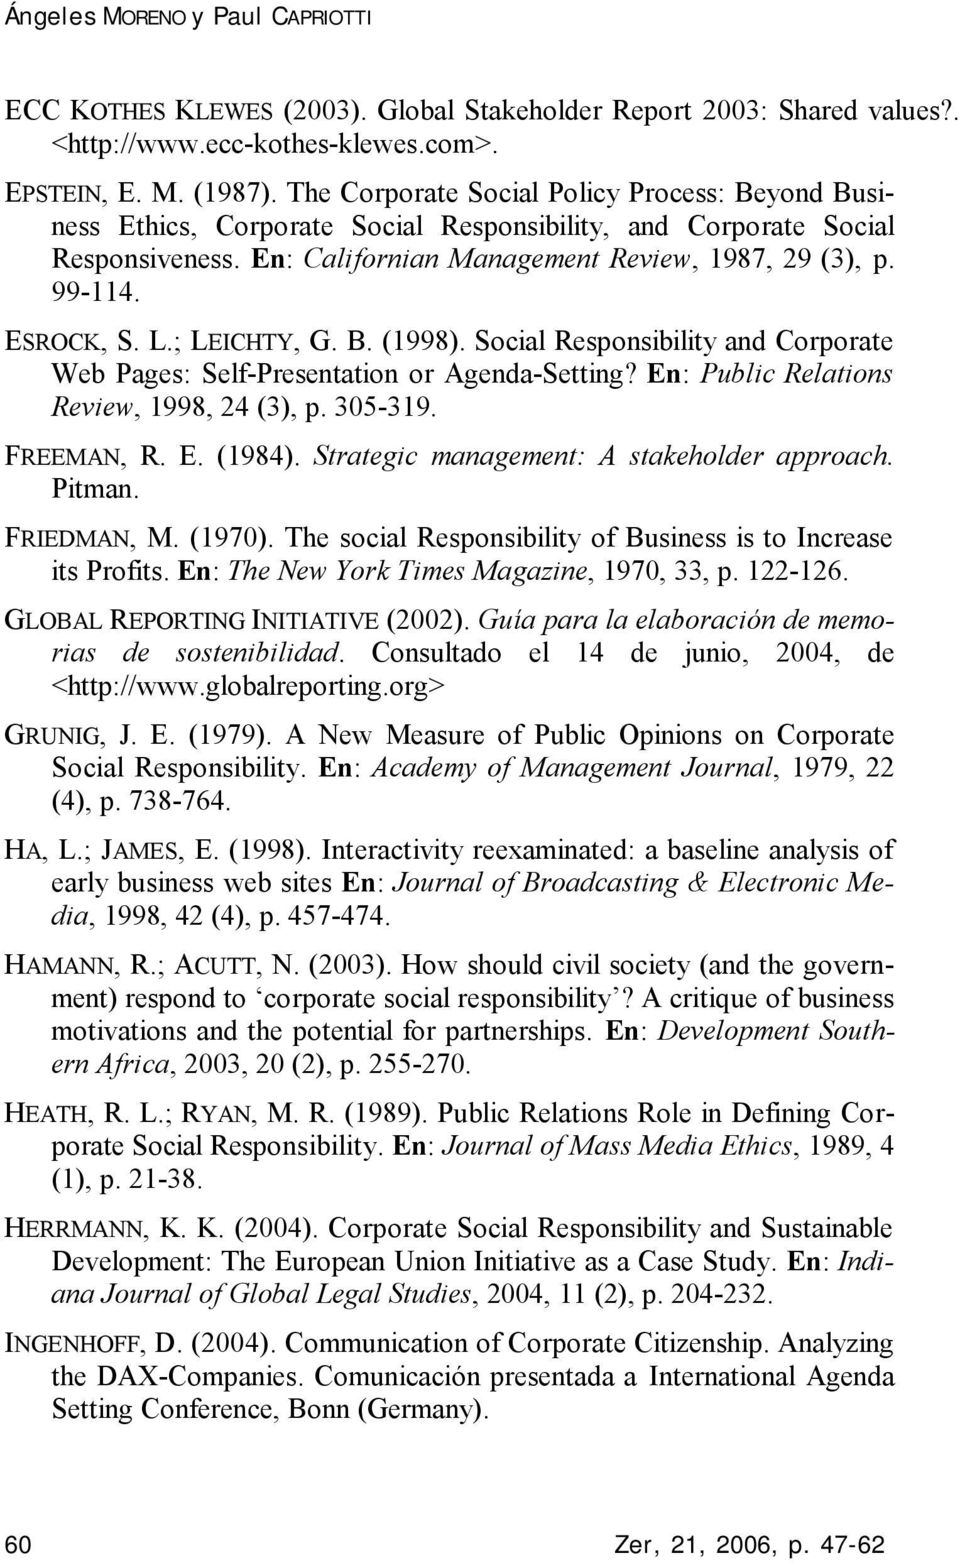 ESROCK, S. L.; LEICHTY, G. B. (1998). Social Responsibility and Corporate Web Pages: Self-Presentation or Agenda-Setting? En: Public Relations Review, 1998, 24 (3), p. 305-319. FREEMAN, R. E. (1984).